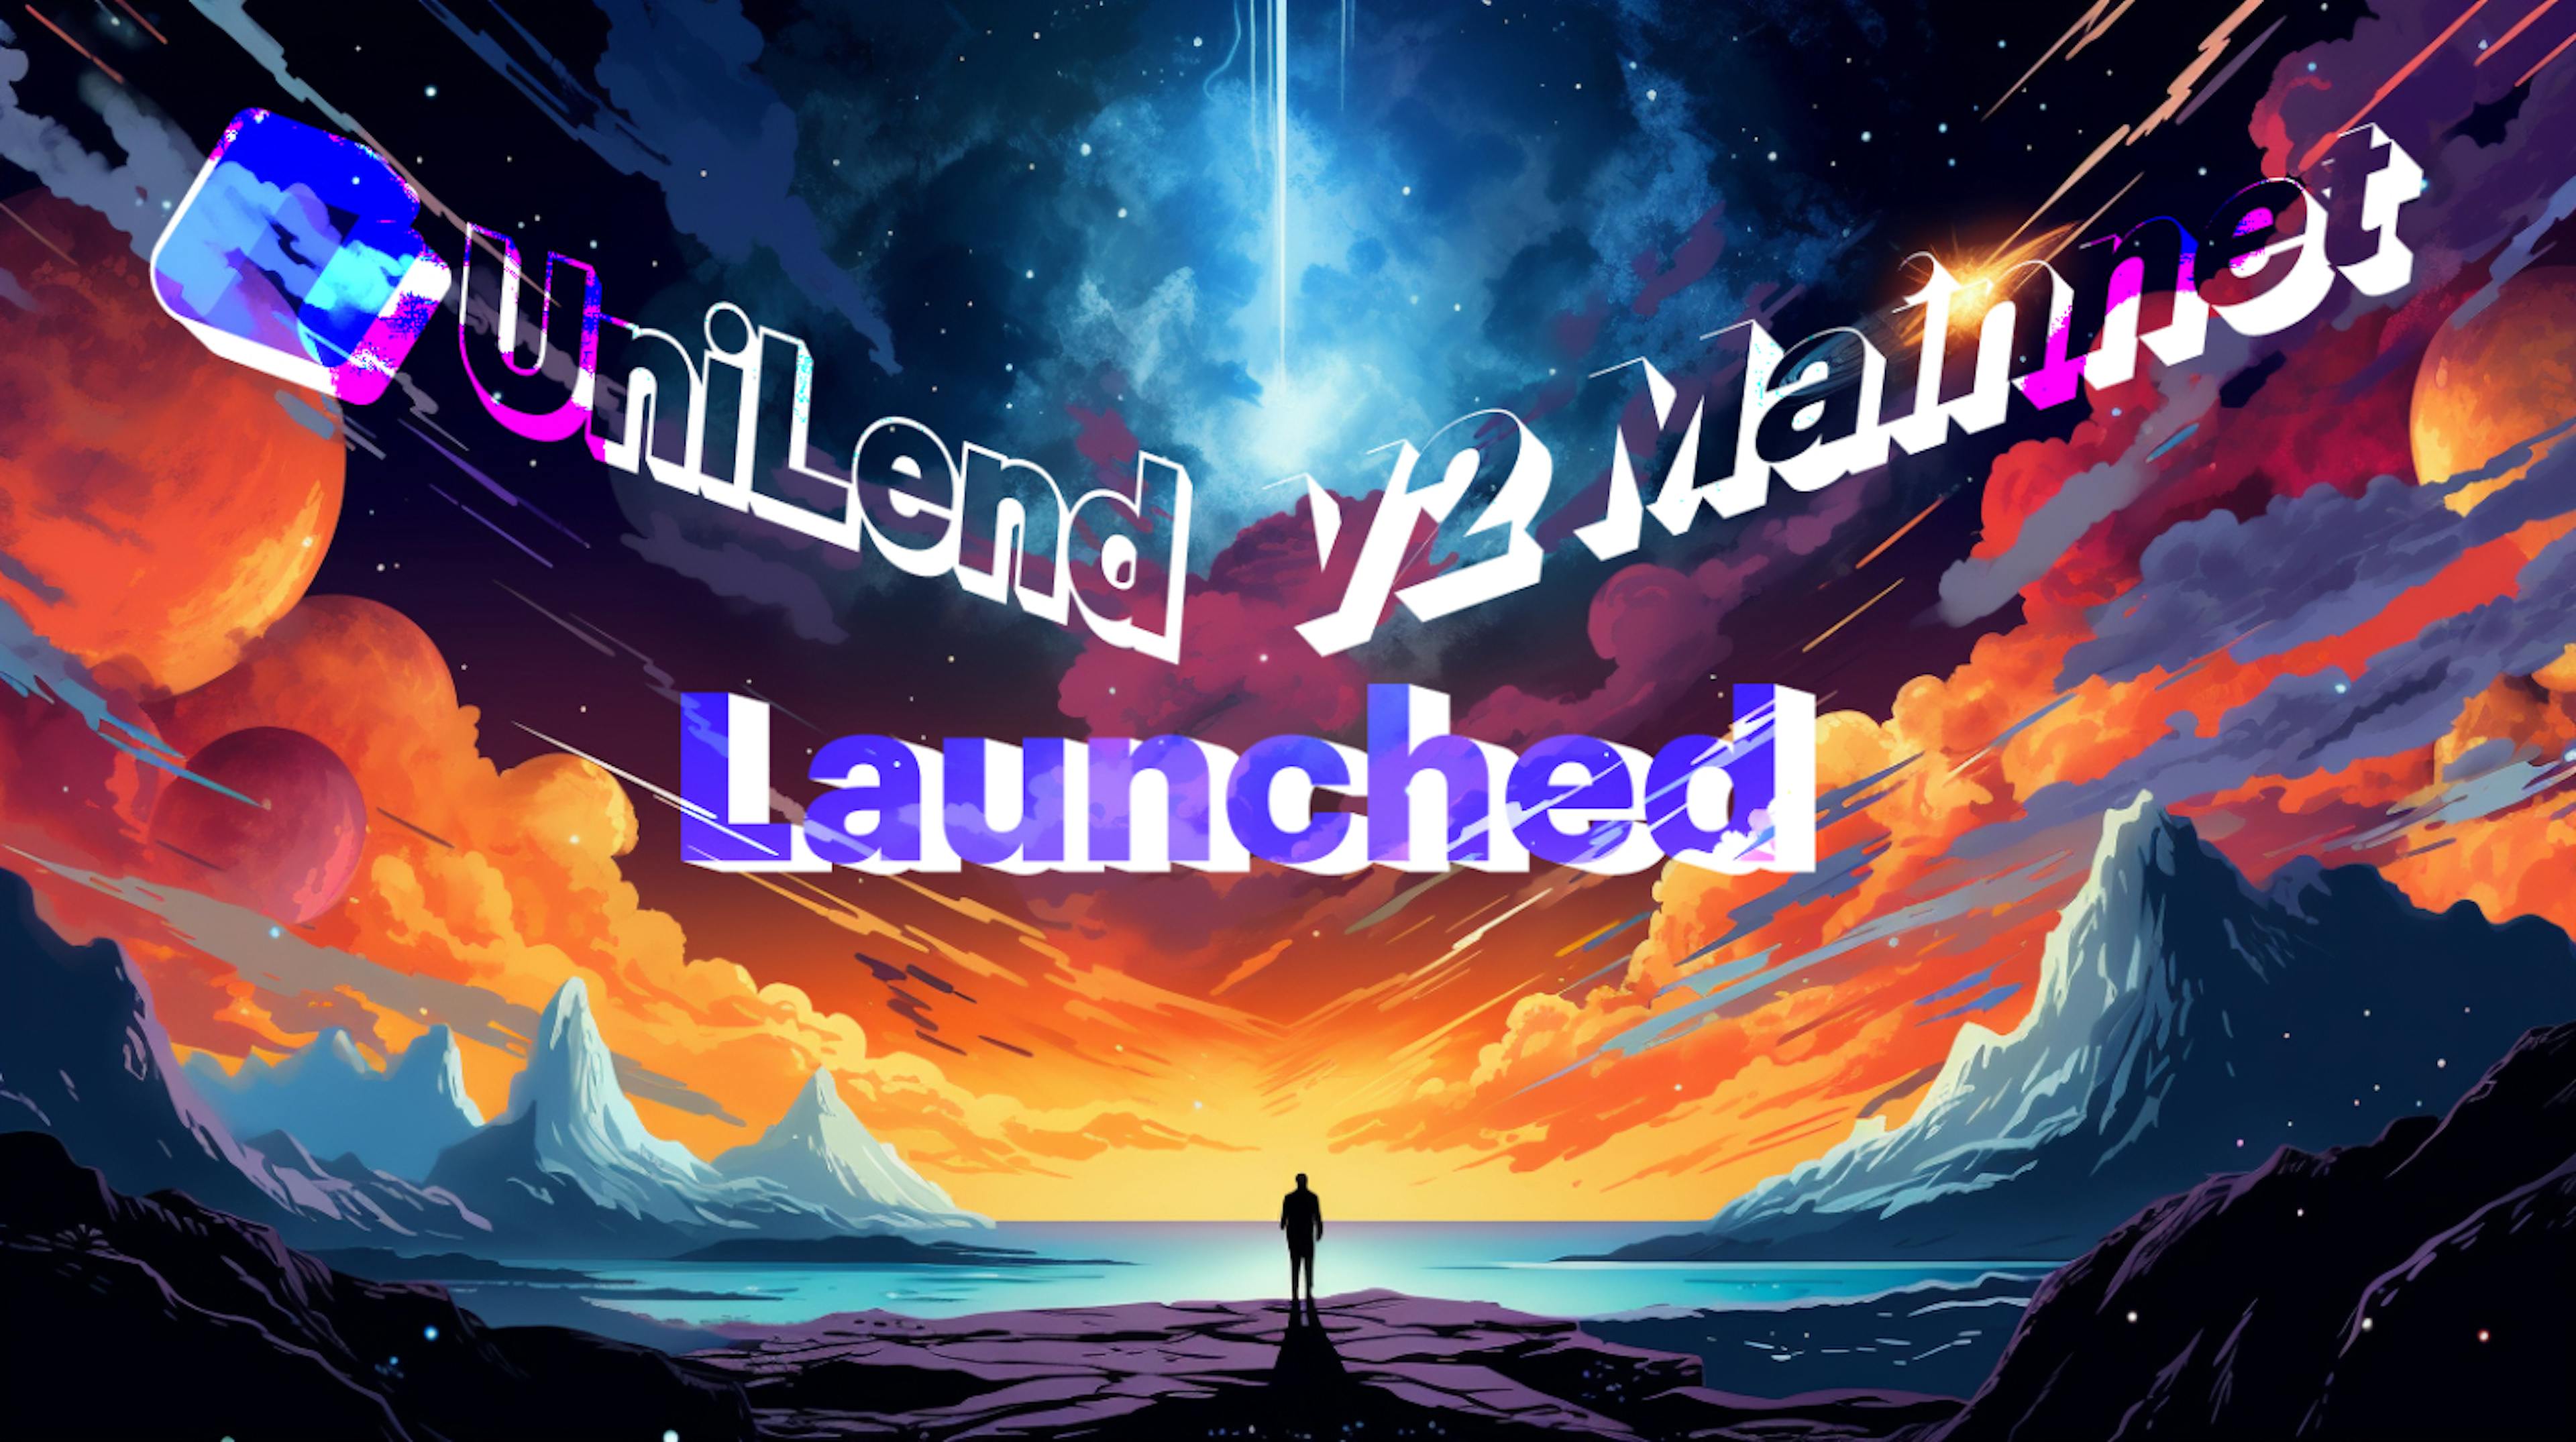 featured image - UniLend V2 Mainnet Launch: Pioneering Permissionless Lending & Borrowing Protocol for All Assets